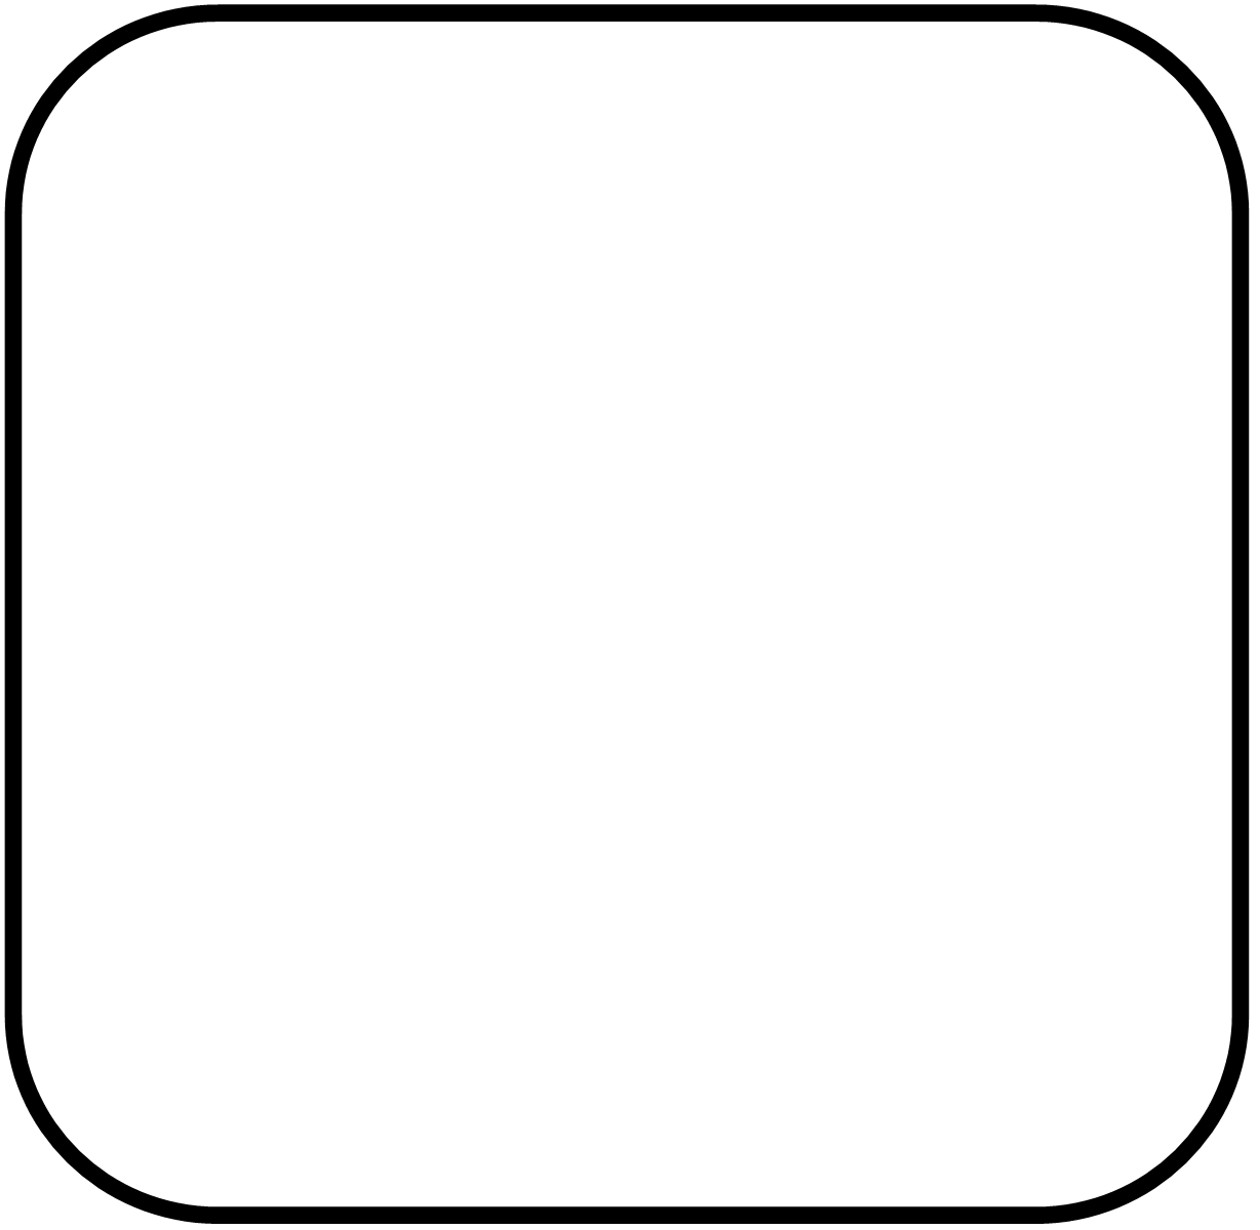 rounded rectangle clip art - photo #13